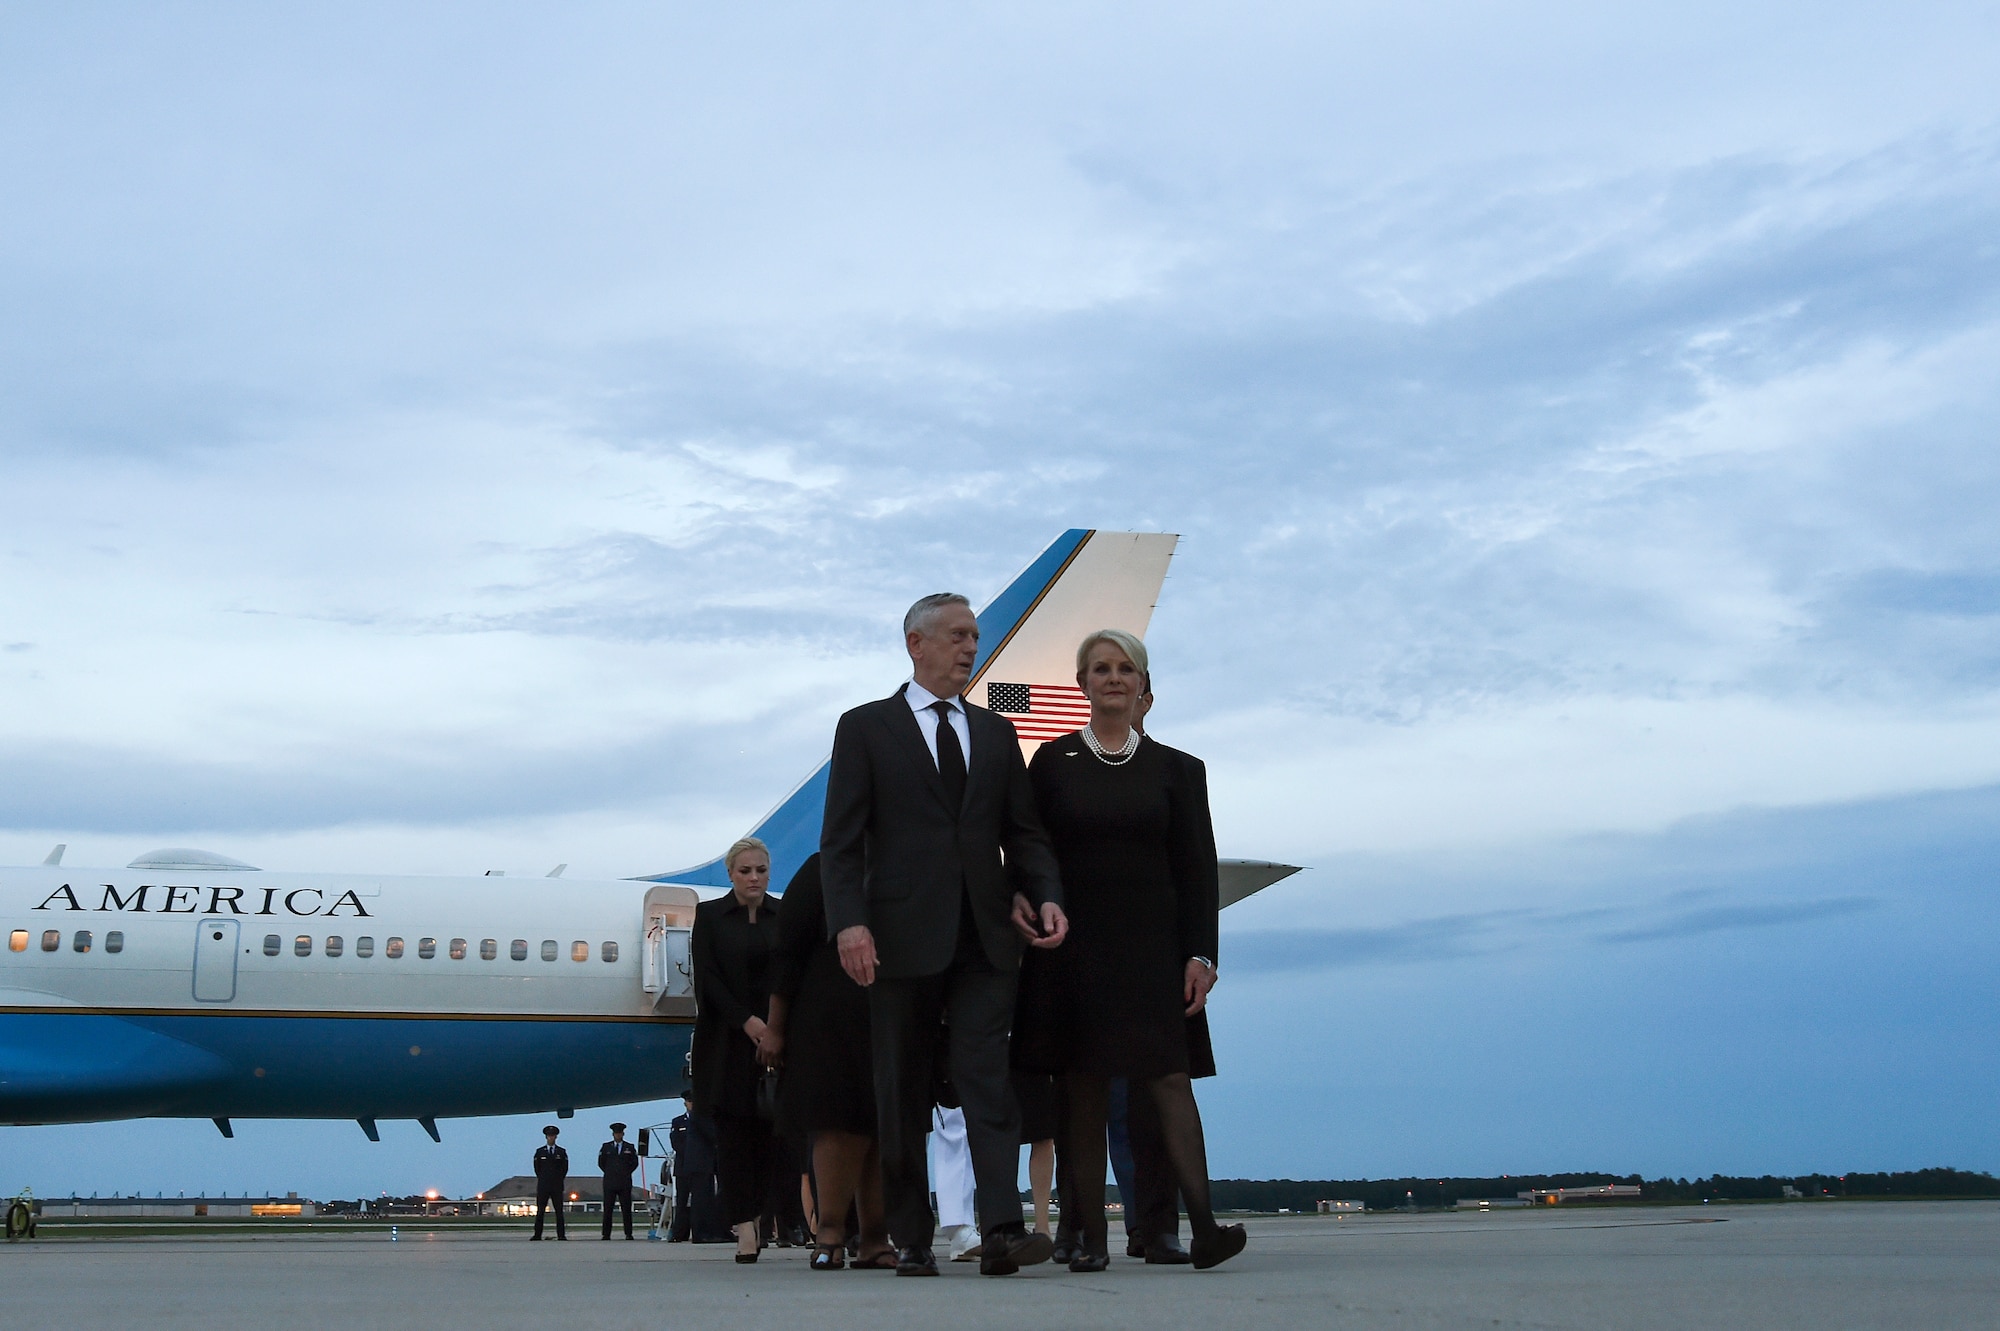 U.S. Secretary of Defense James N. Mattis walks with Cindy McCain, wife of Senator John McCain after greeting her at the steps of an 89th Airlift Wing C-32 aircraft upon arrival at Joint Base Andrews, Md., Aug. 30, 2018. The aircraft arrived with the remains of McCain and his family. (U.S. Air Force photo by Staff Sgt. Kenny Holston)